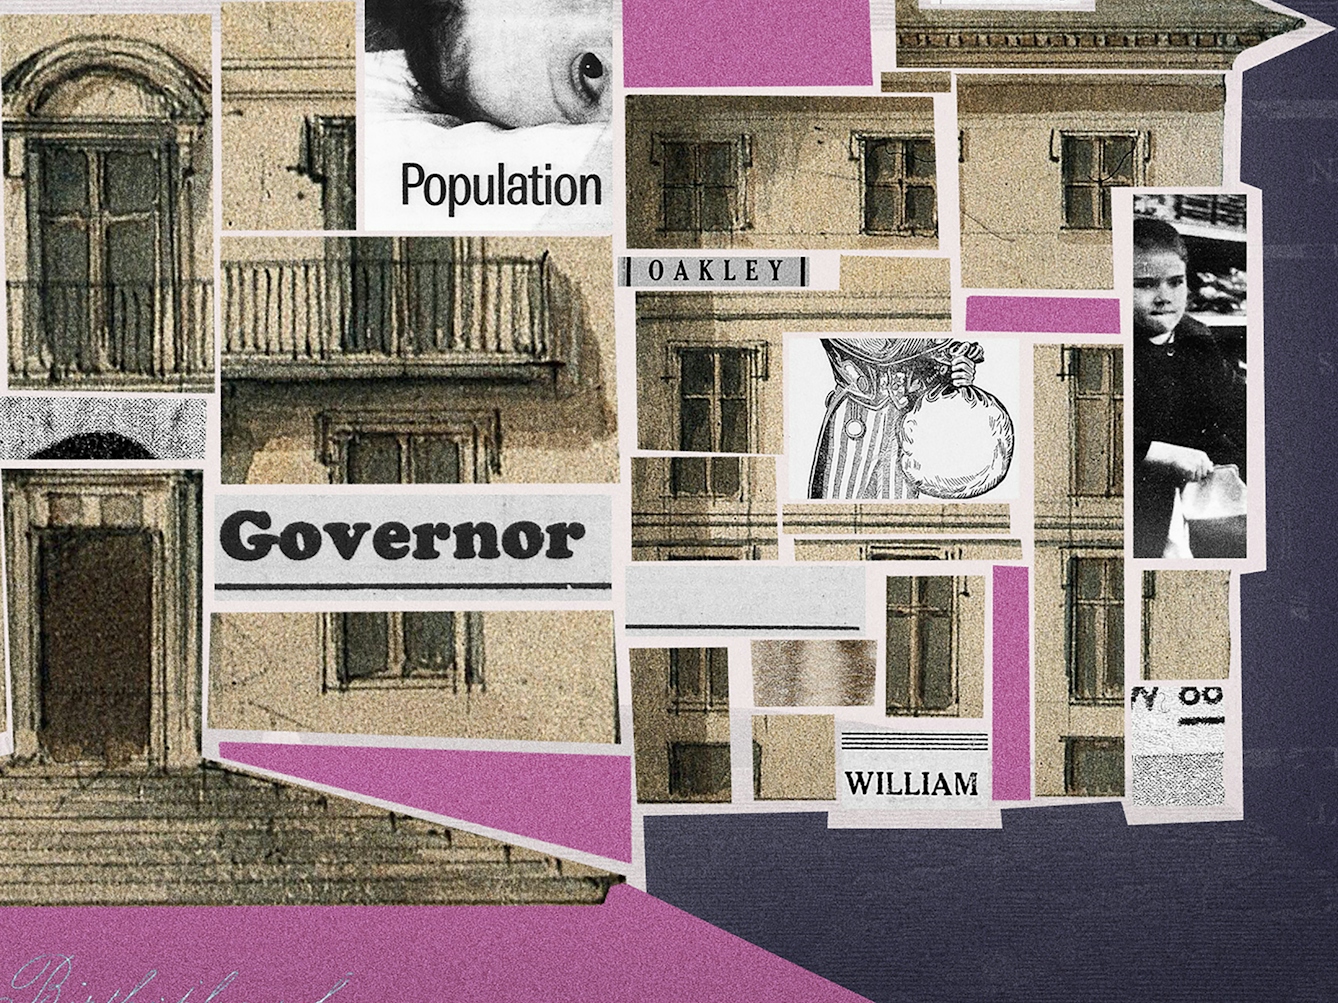 Crop from a larger digital collage. Shown is a building, labelled 'The Birthplace of'. The building's interior is filled with different collage elements, including newspaper cut-outs reading 'Beveridge', 'Ann', 'Richard', 'Governor', 'Population', 'Oakley', 'William' and 'Mauritius'. There are a number of black and white images, one of a baby lying down, one of a mother holding a baby, one of a child playing with coins on a table, and one of a child holding a bag. There are a number of windows and balconies, a chimney, and a central door with steps leading down from it.